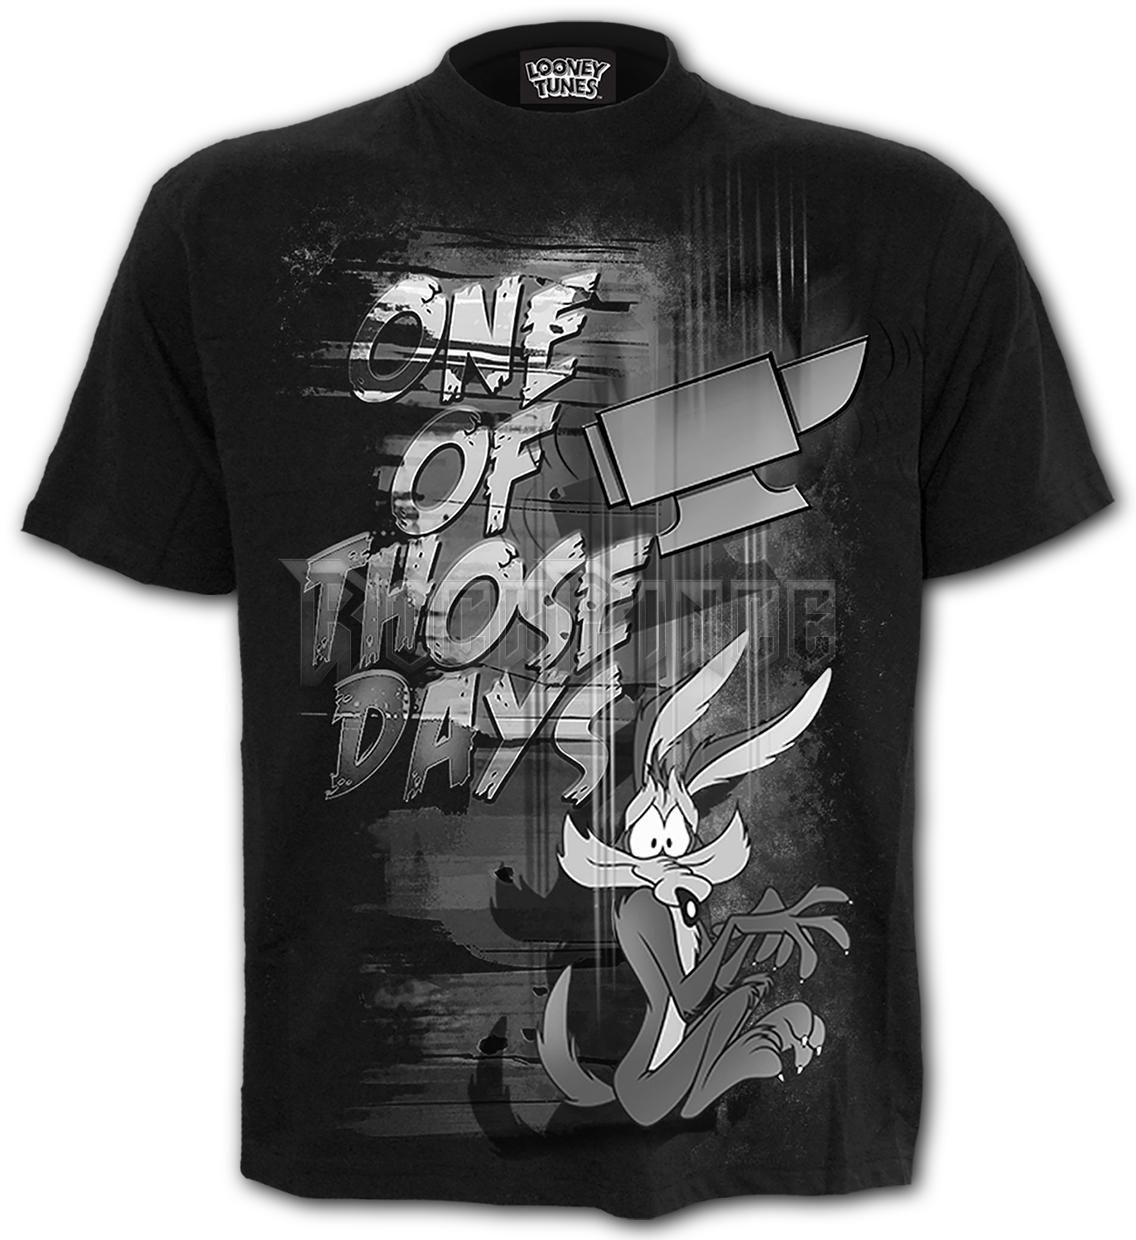 COYOTE - THOSE DAYS - Front Print T-Shirt Black - G508M121